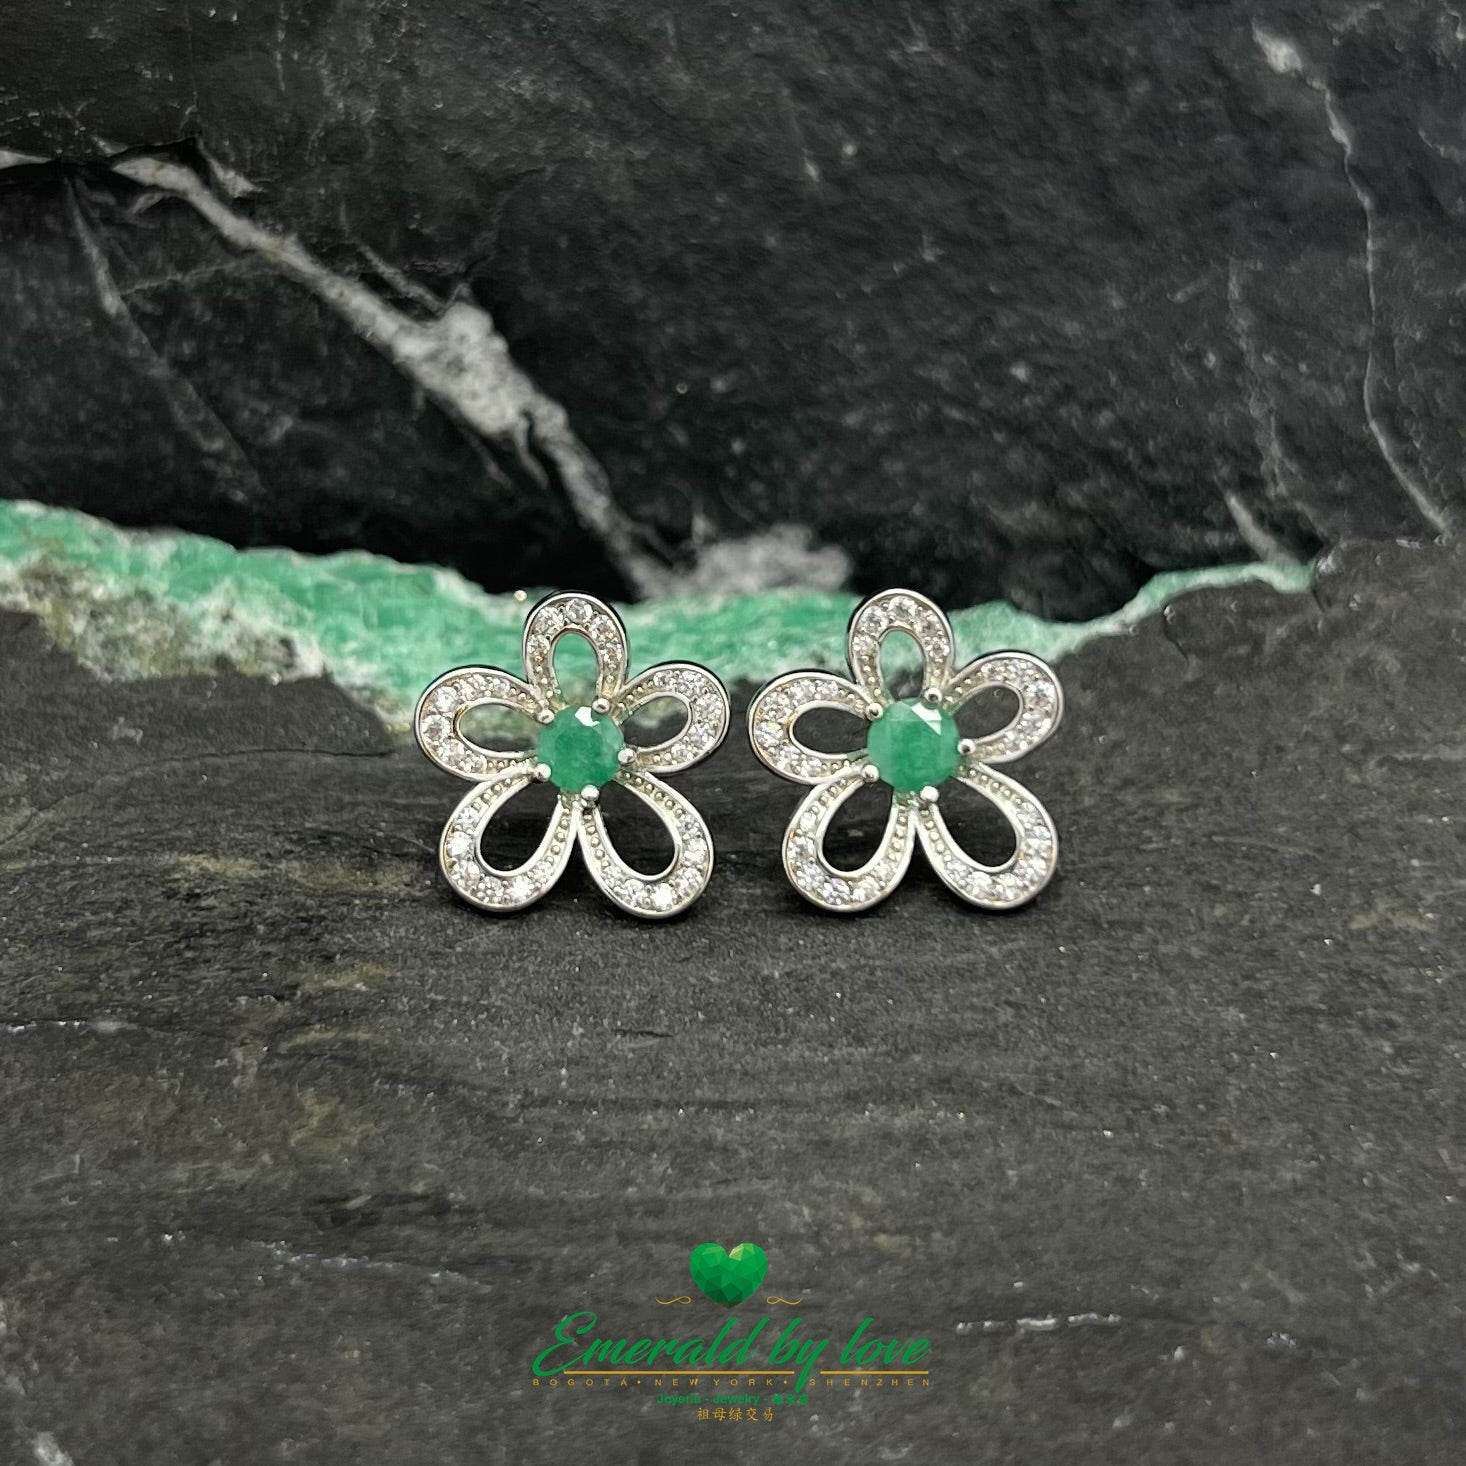 Medium flower-Shaped Sterling Silver Earrings with Central Round Emerald